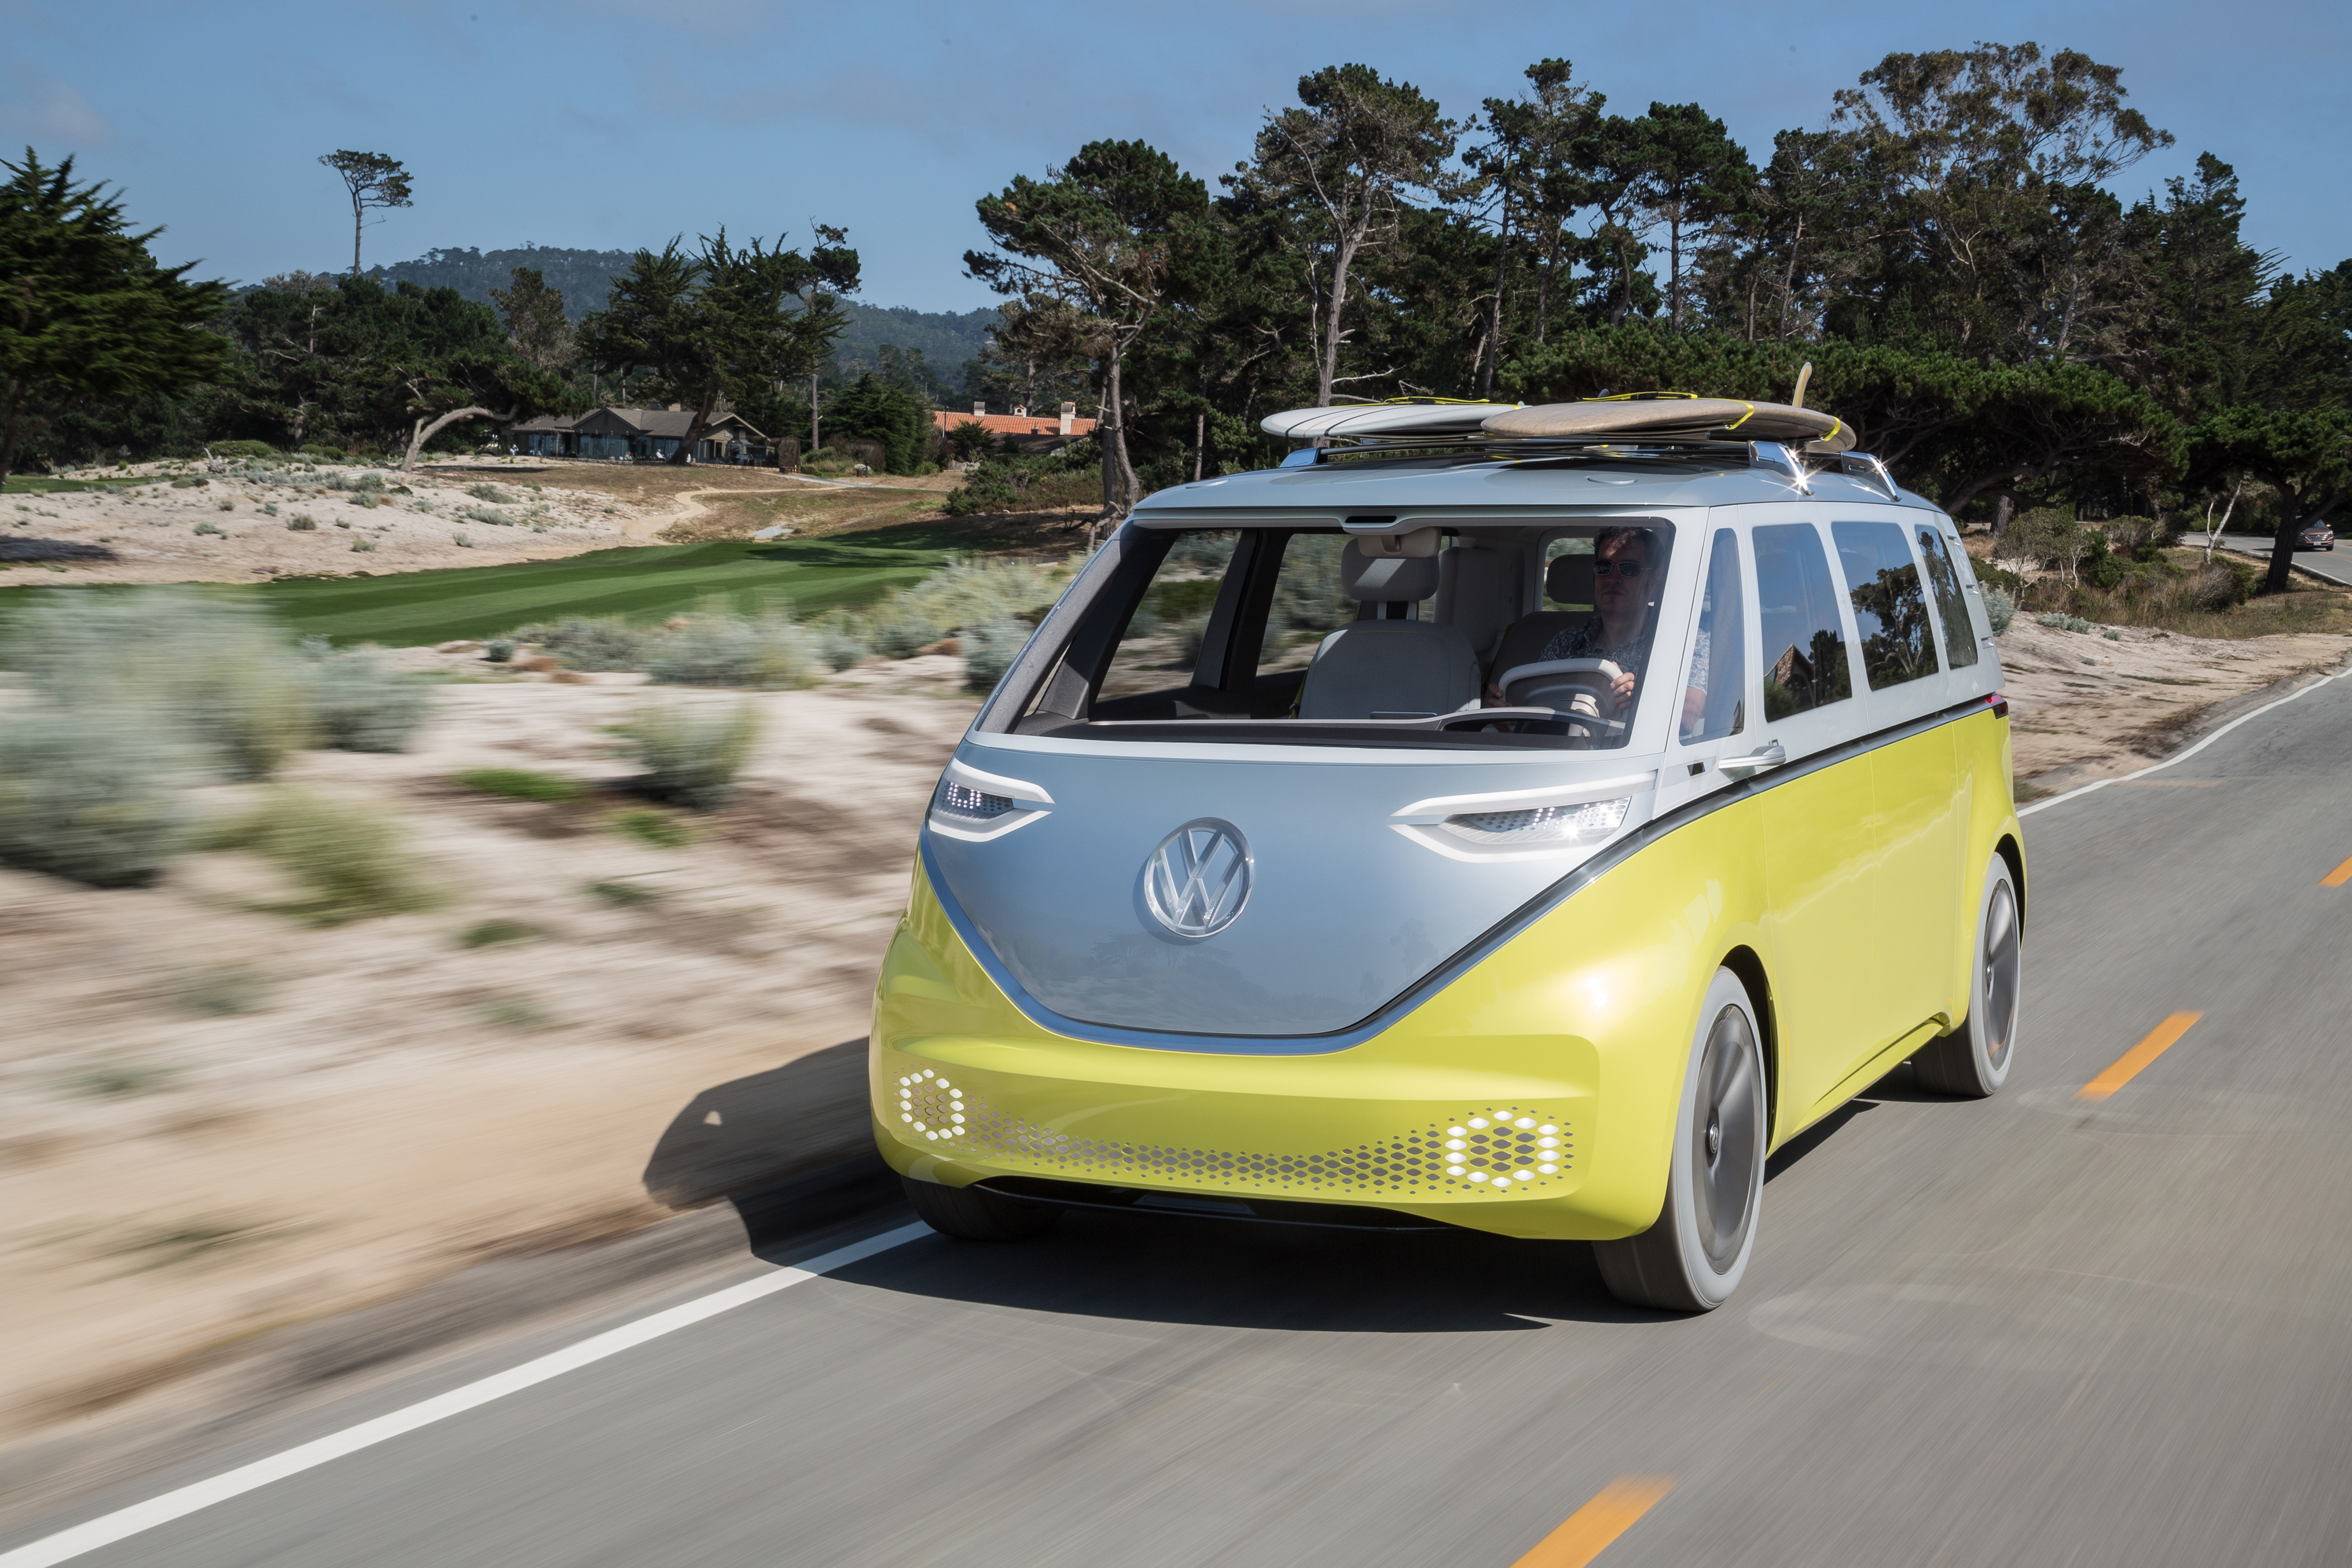 Volkswagen Resurrecting The Microbus With New Electric Version